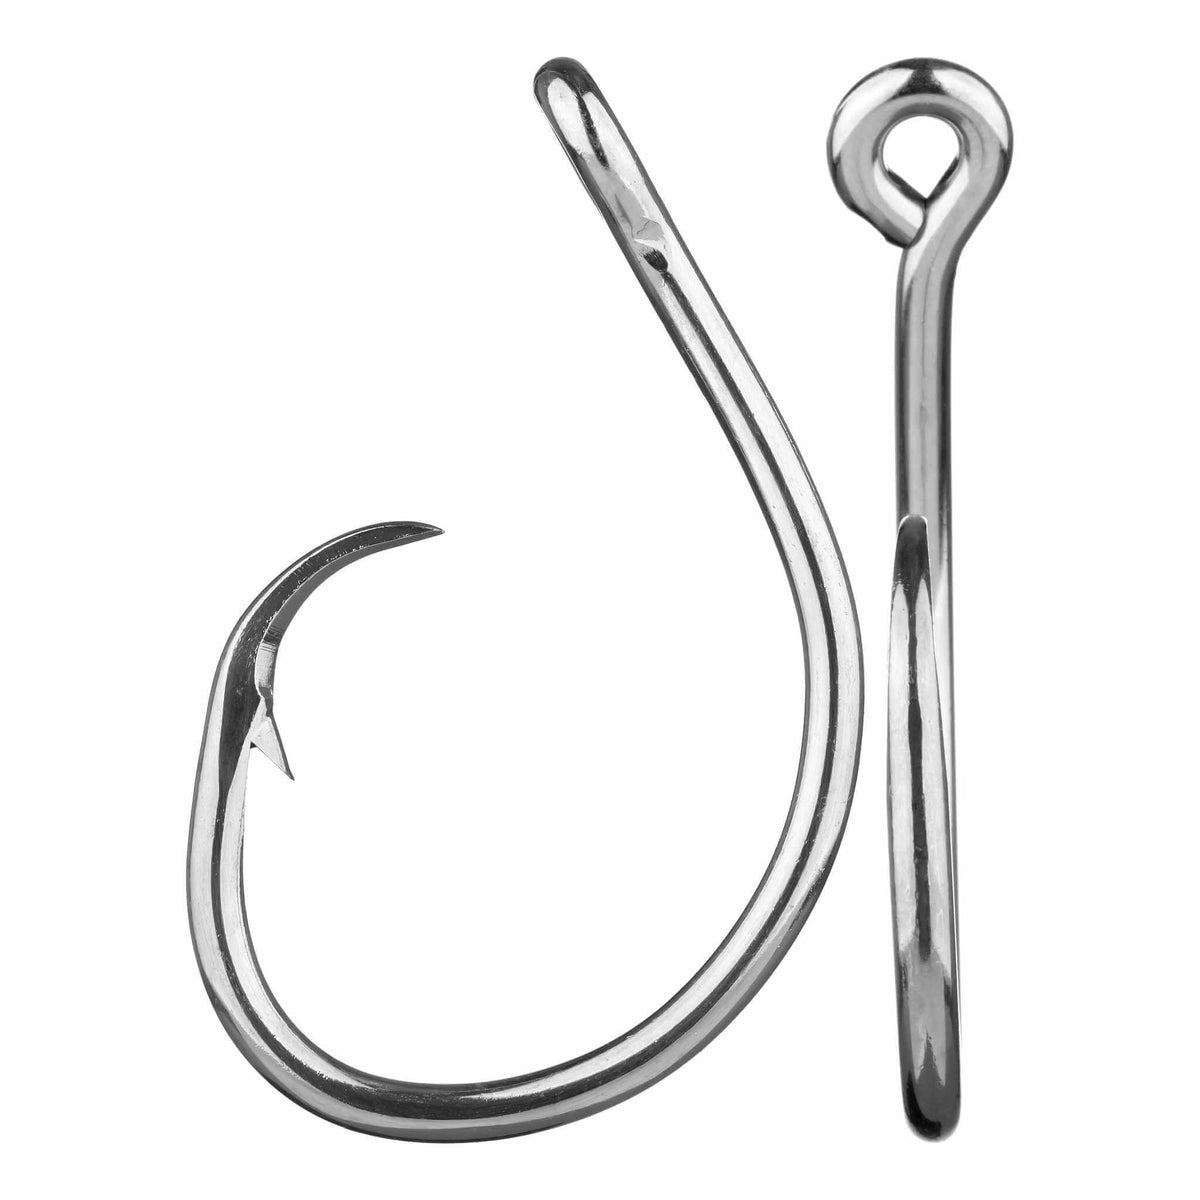 Lot of 8 MUSTAD FORGED DURATIN Circle Hooks: 16/0 - NEW OTHER